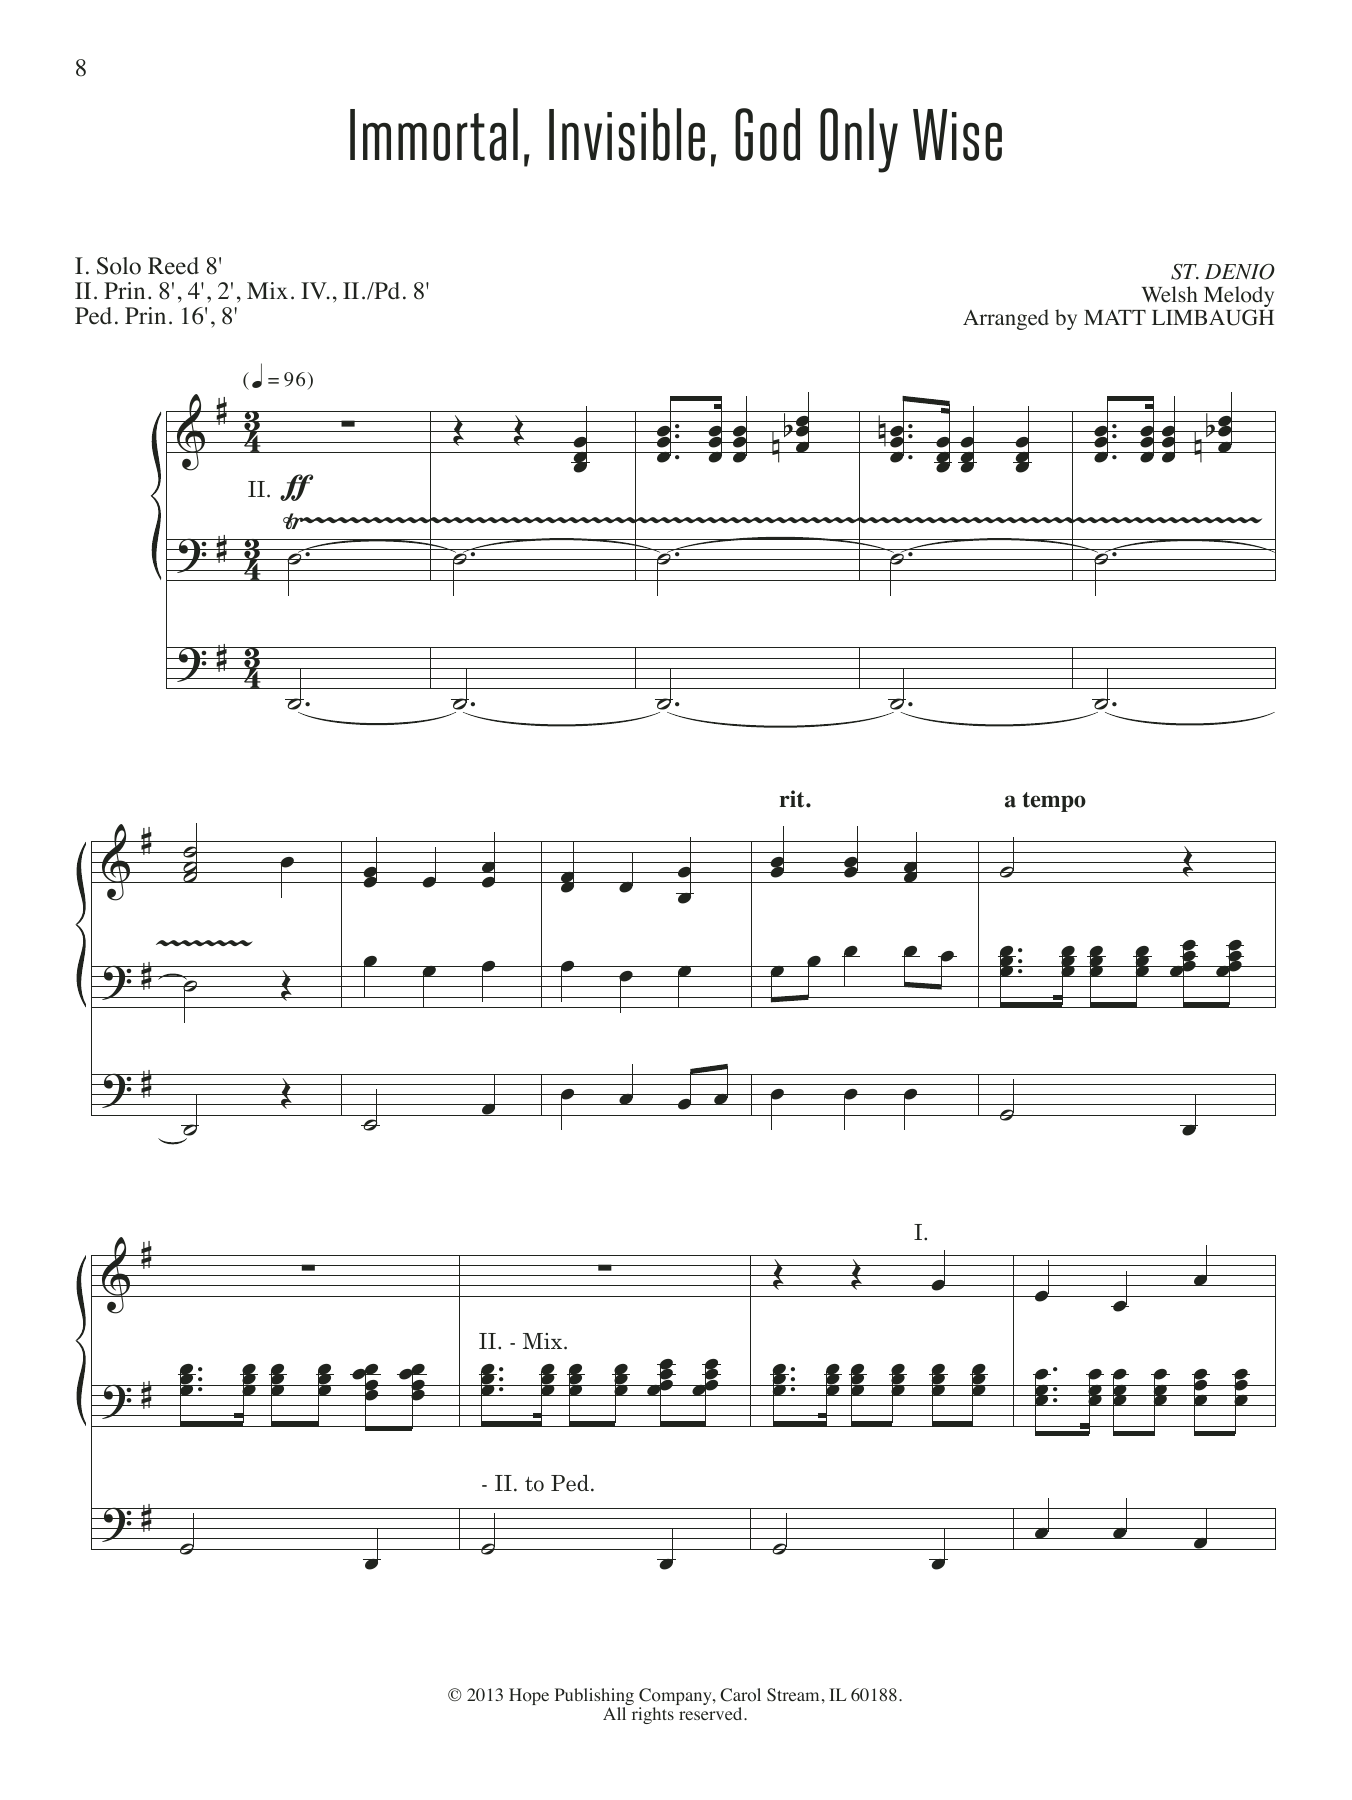 Download Matt Limbaugh Immortal, Invisible, God Only Wise Sheet Music